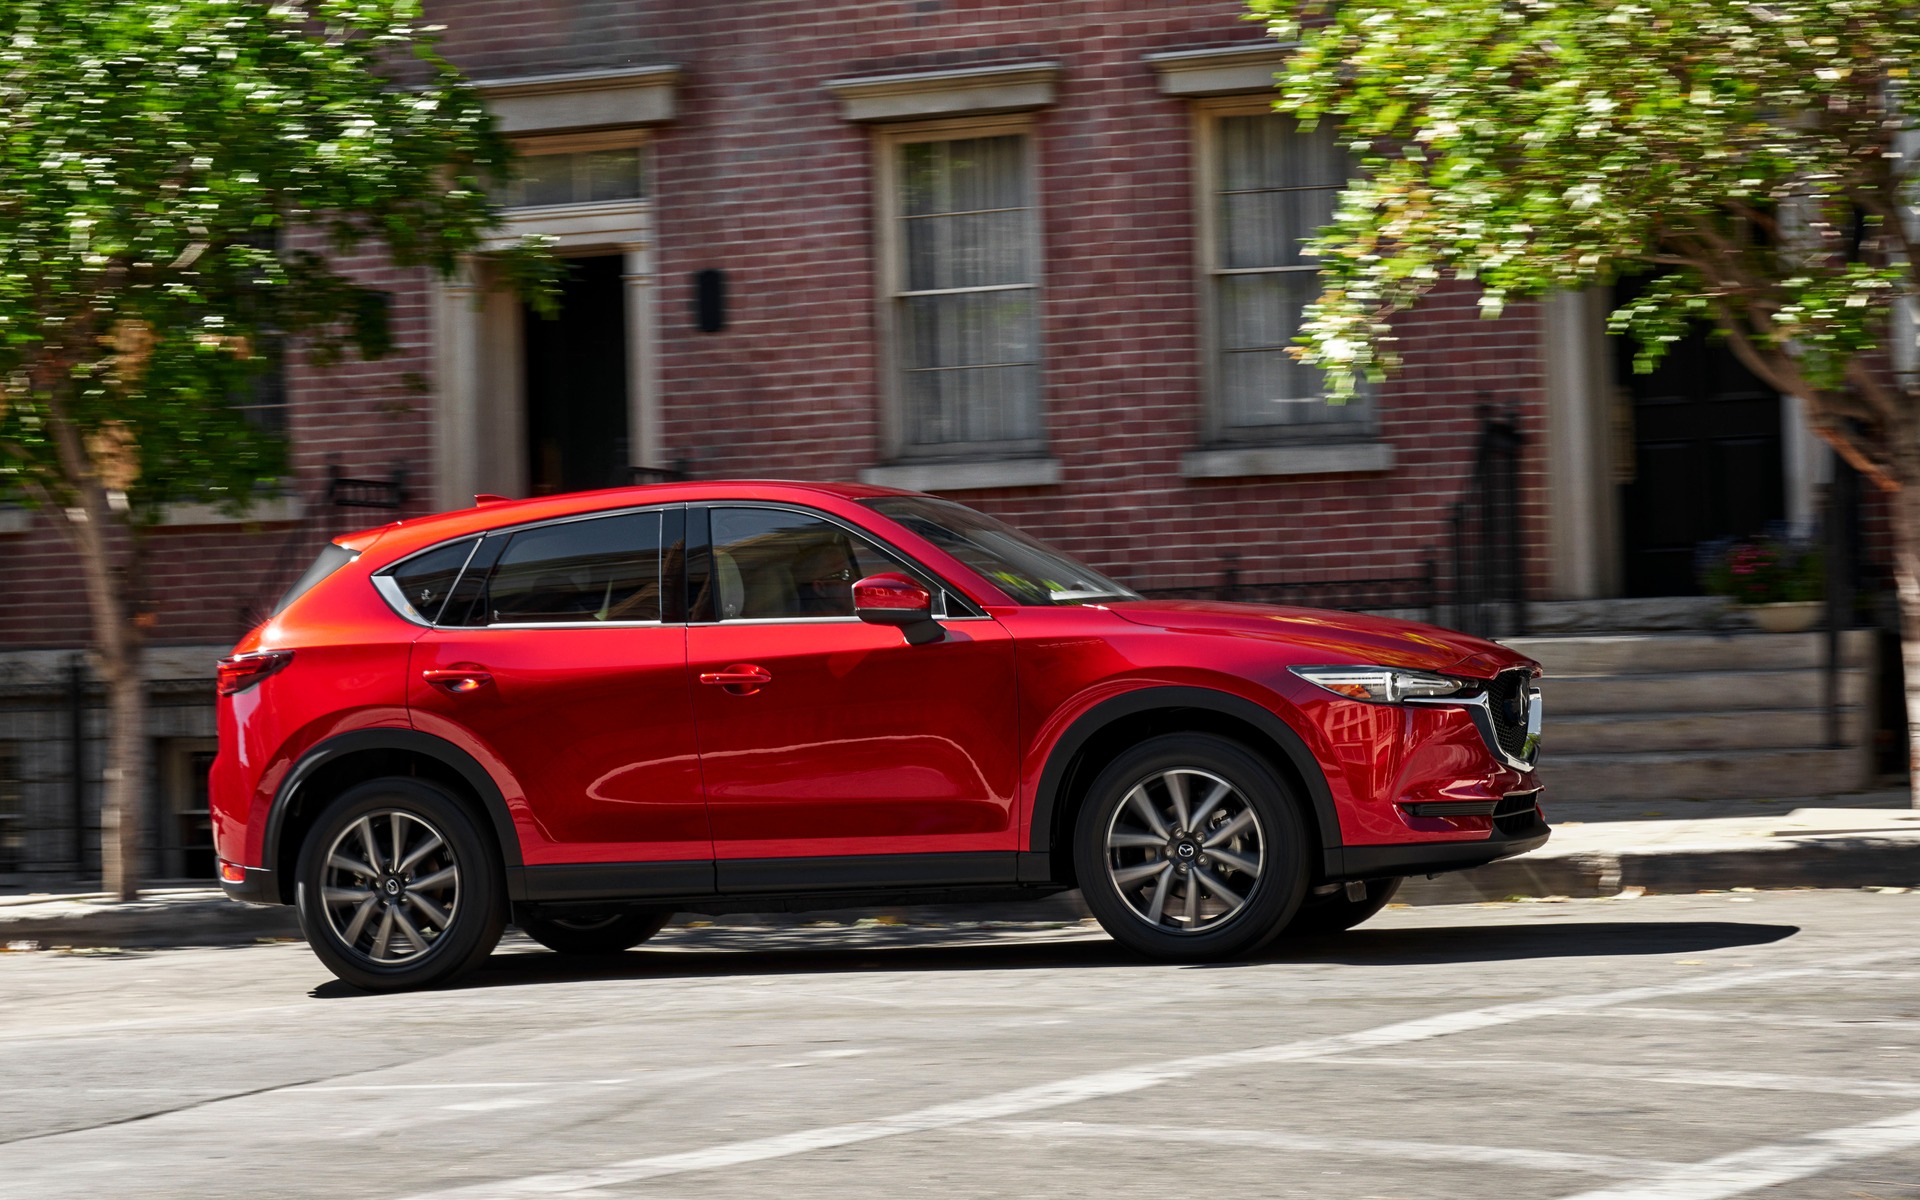 2017 Mazda CX-5: Production Already Under Way in Japan - 7/14